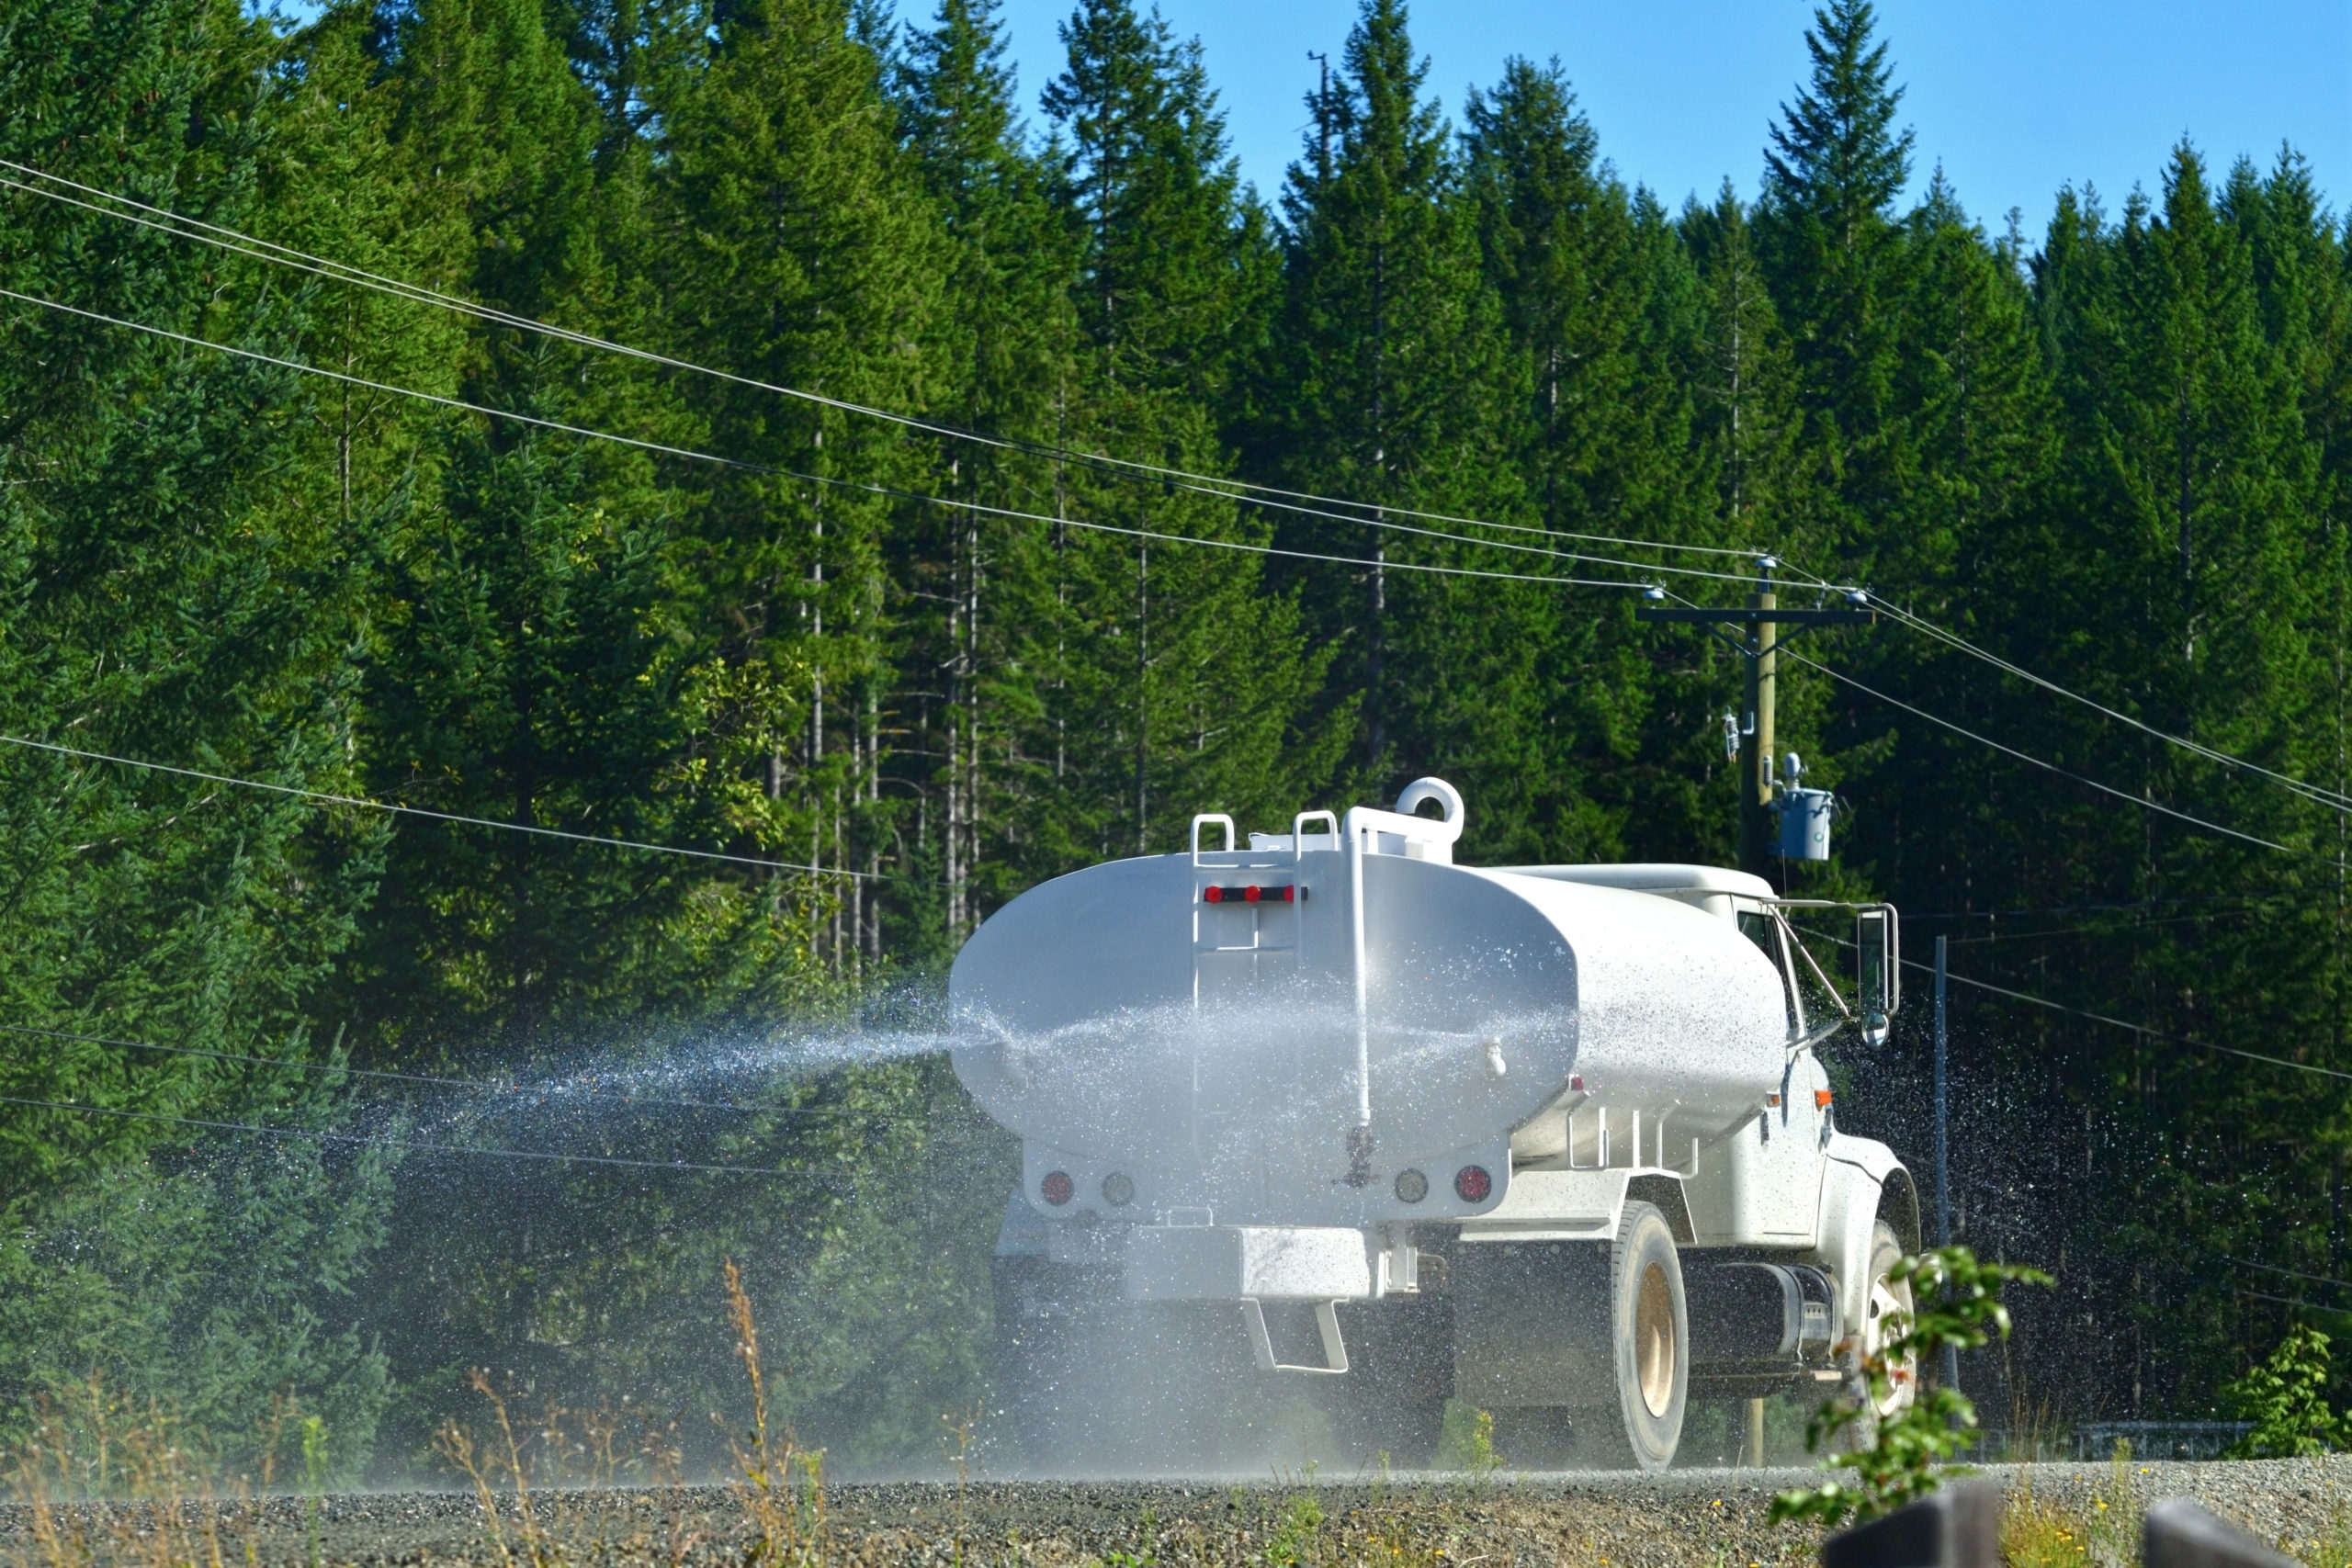 A dust suppression truck is traveling through a road surrounded by green trees while spraying water to suppress dust.